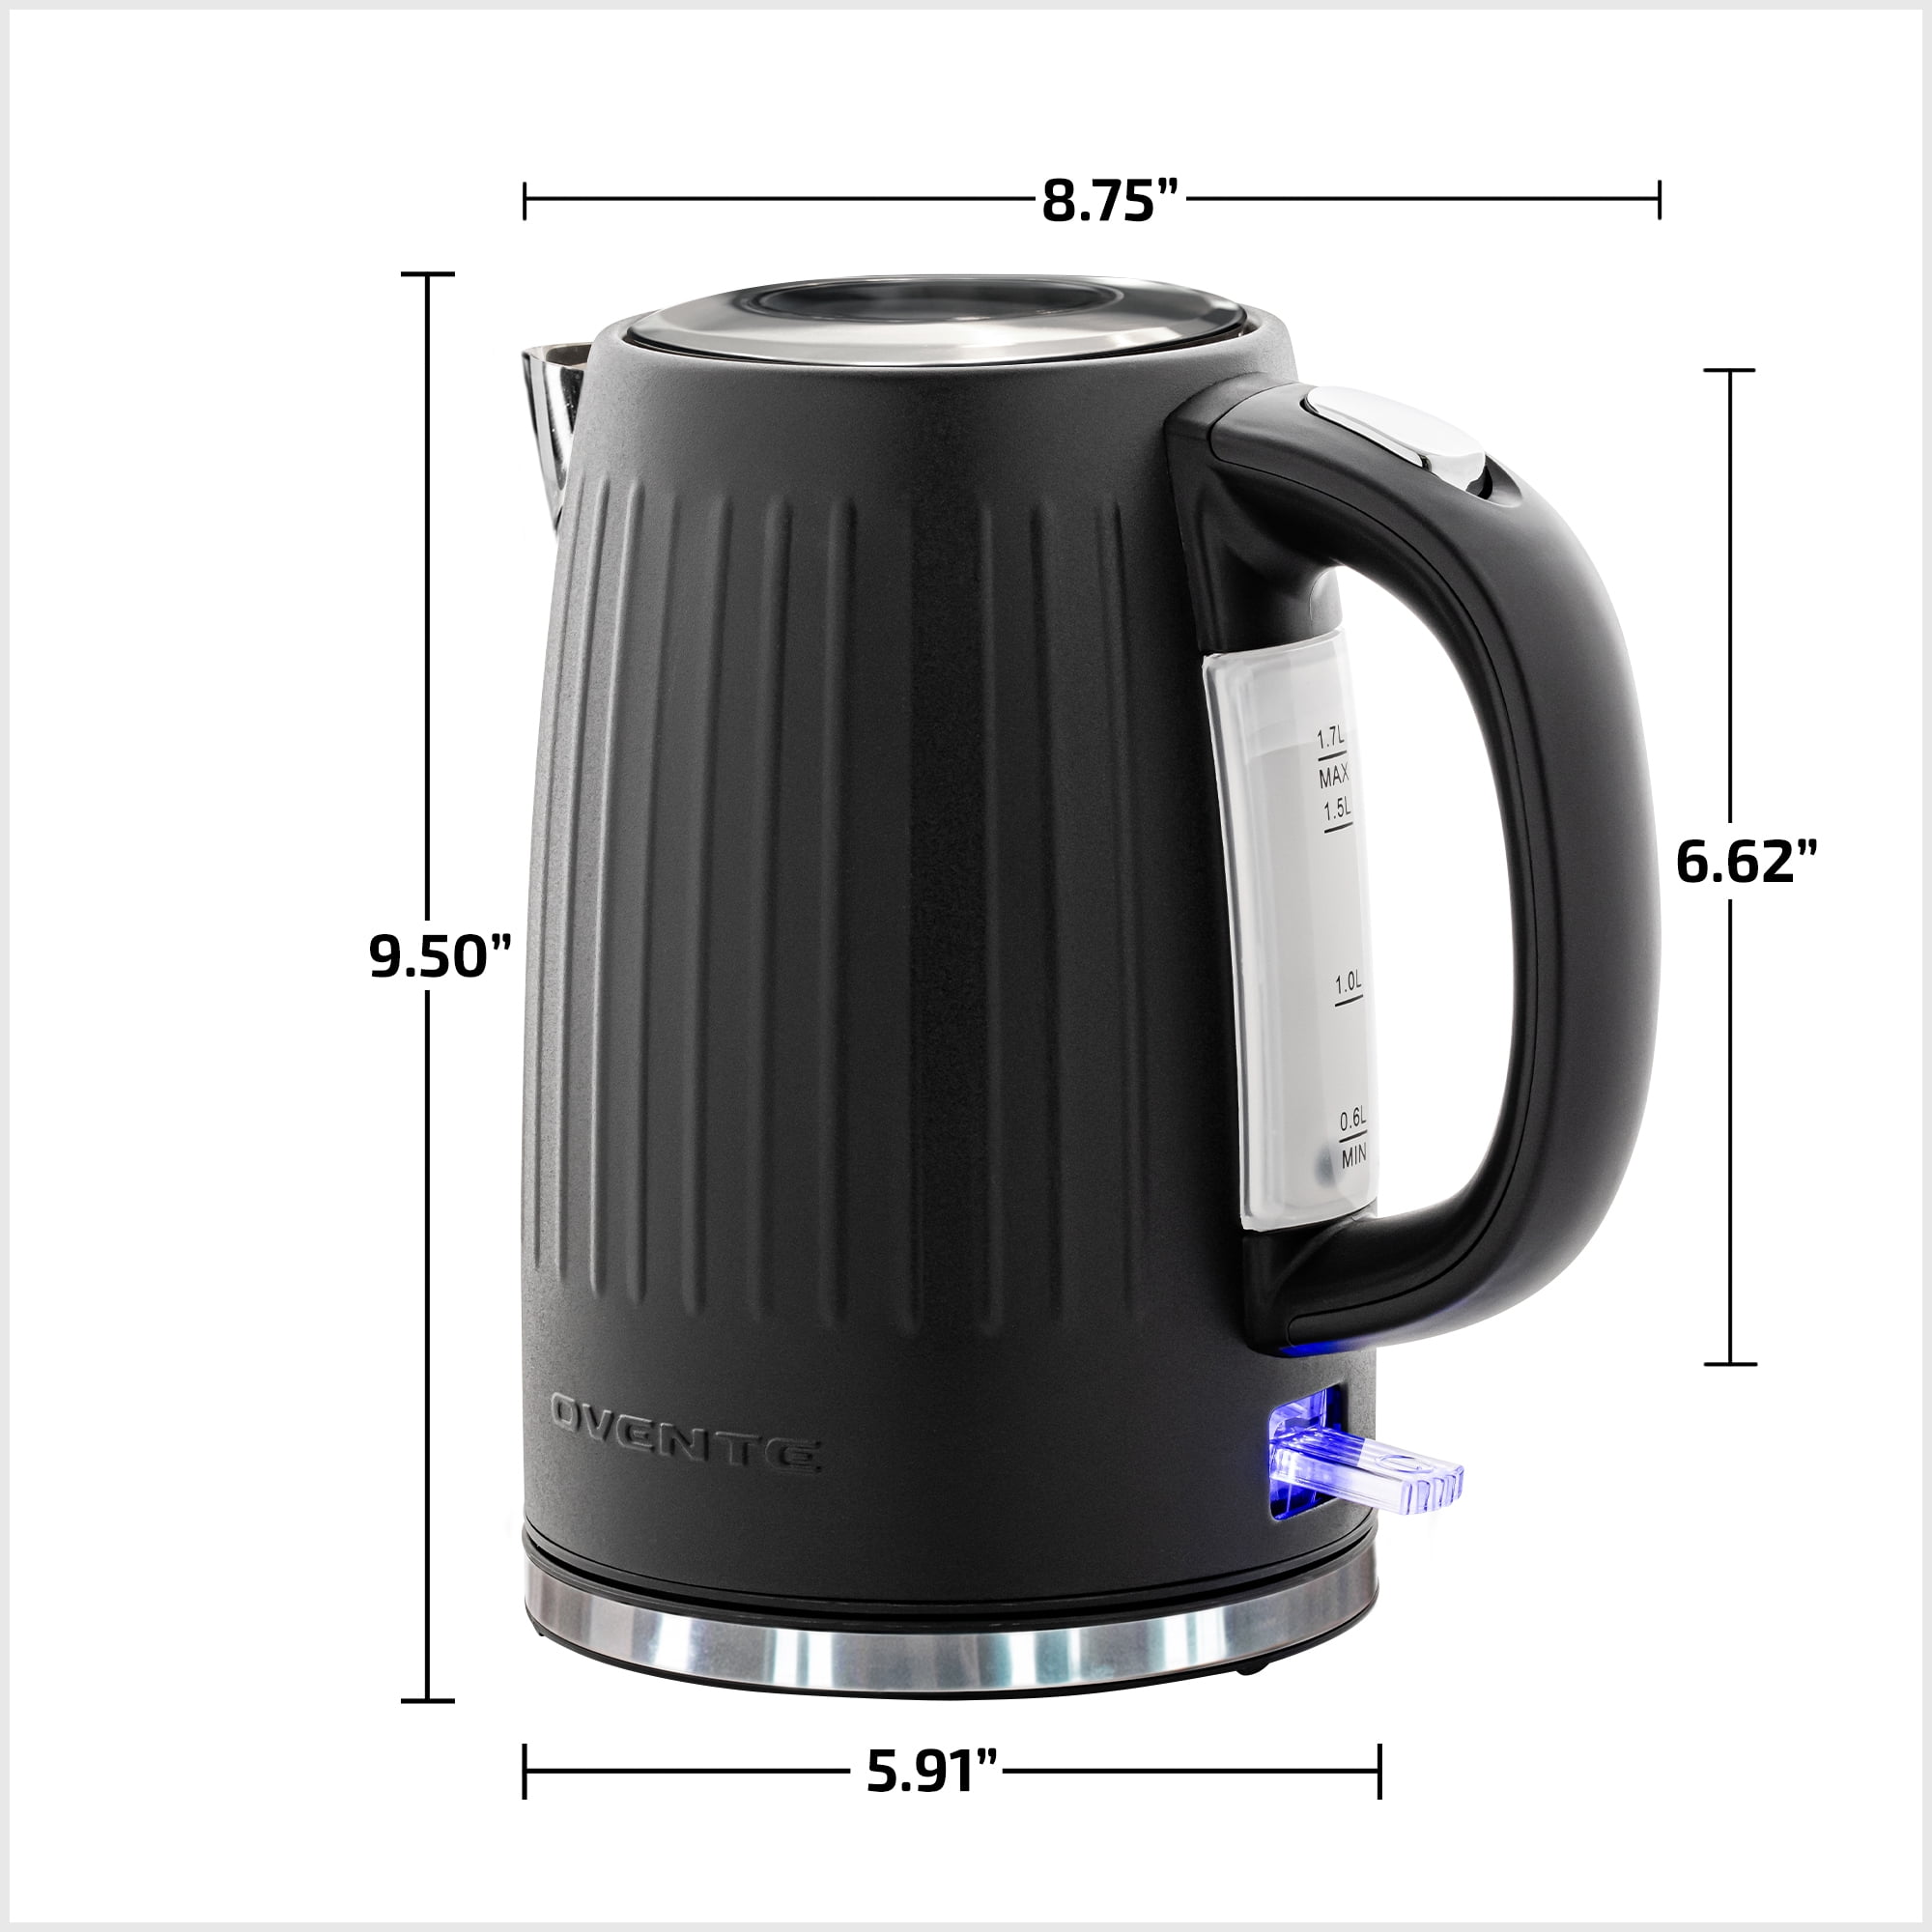 Ovente Electric Stainless Steel Hot Water Kettle 1.7 Liter with 5 Temperature  Control & Concealed Heating Element, KS89 Series - Bed Bath & Beyond -  23385942